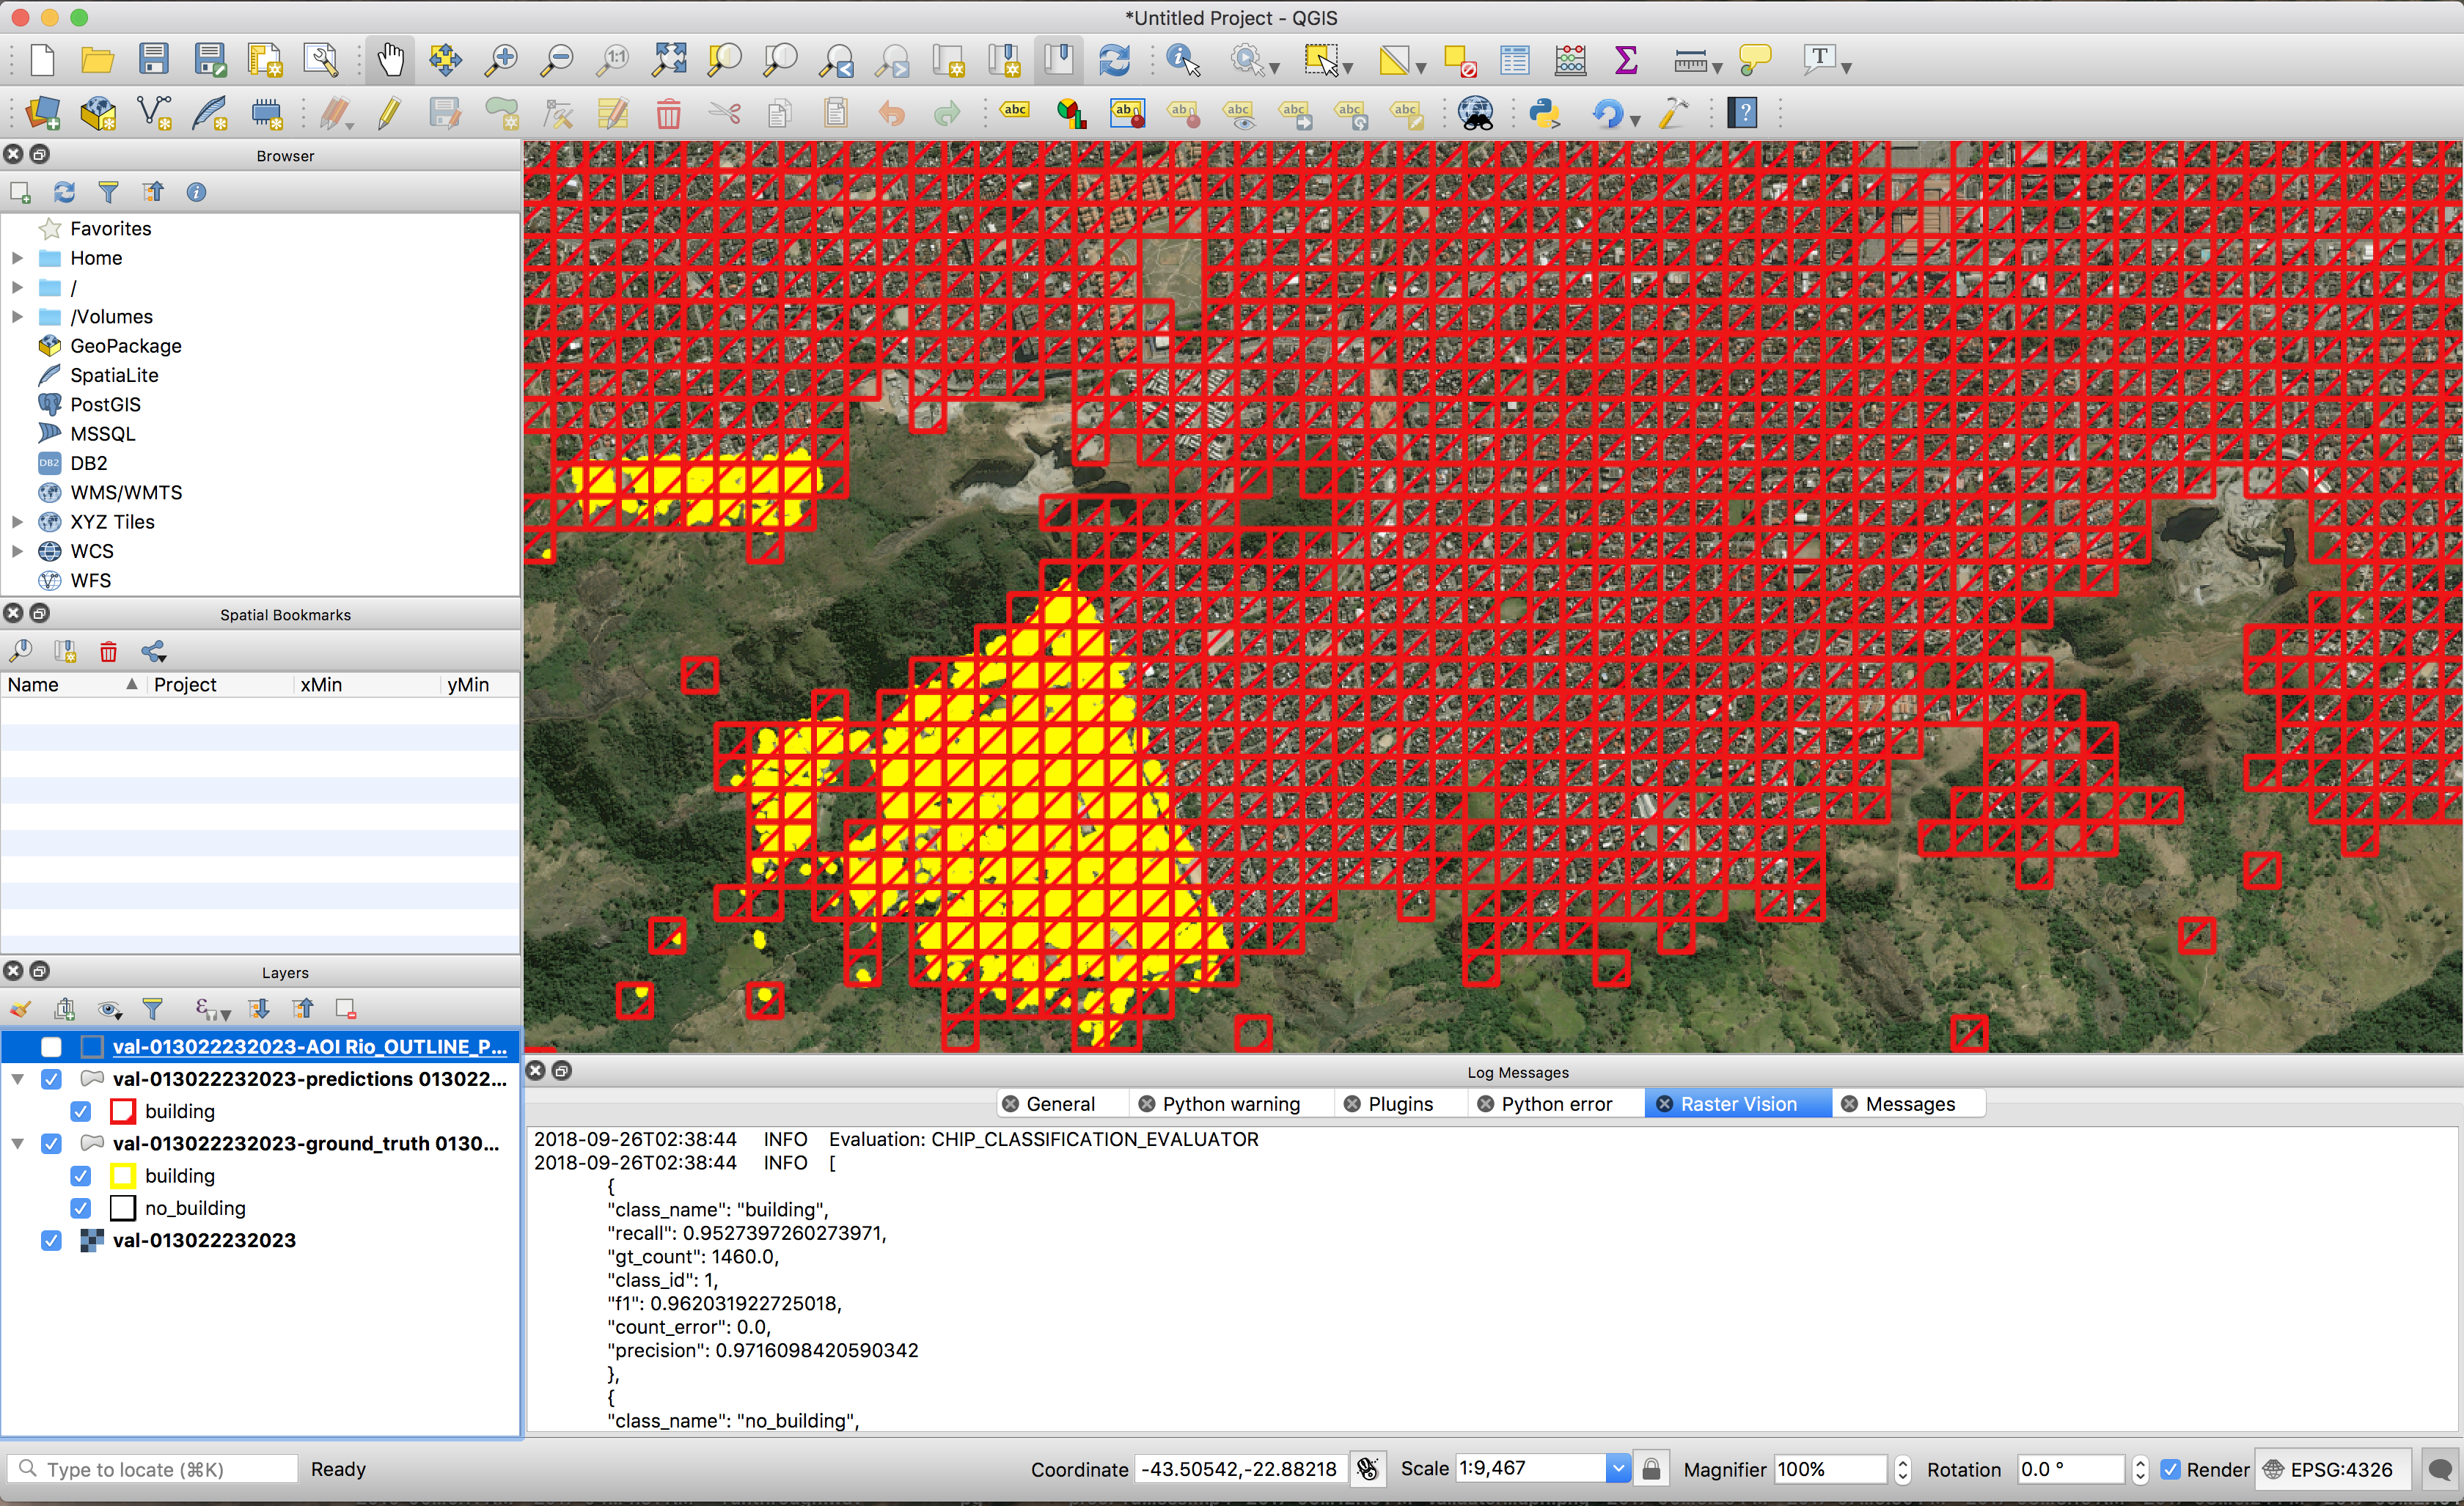 An example of shared Raster Vision experiment results in QGIS